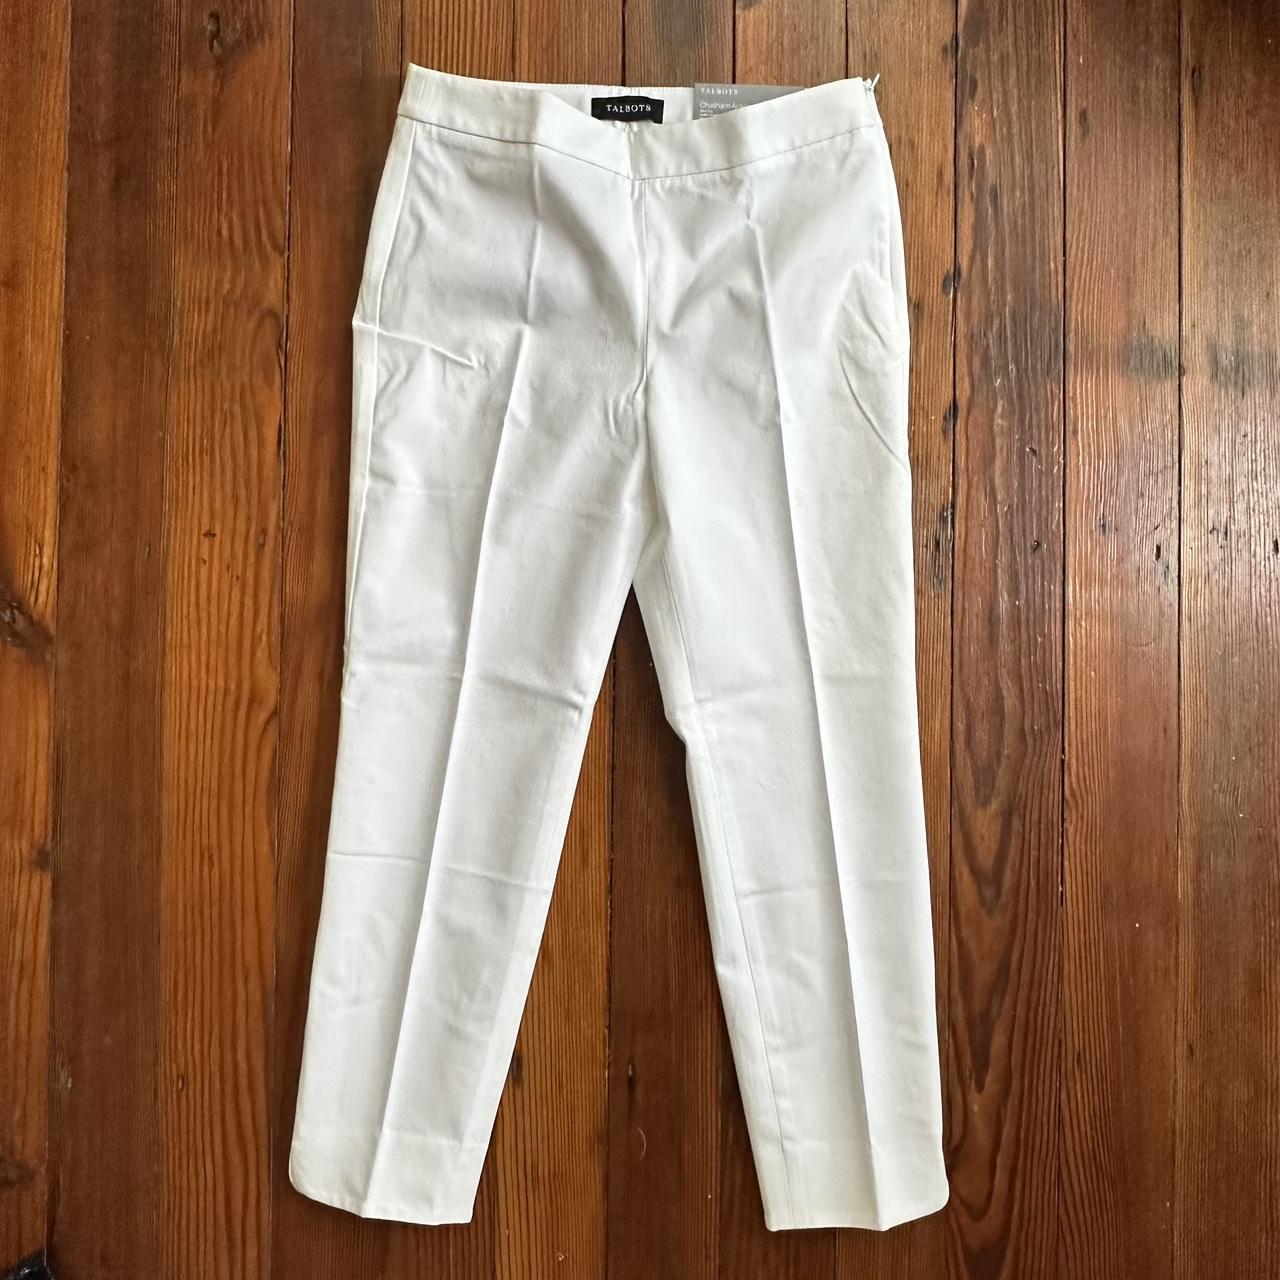 NWT Talbots Chatham Ankle Pants in White Petite - Depop